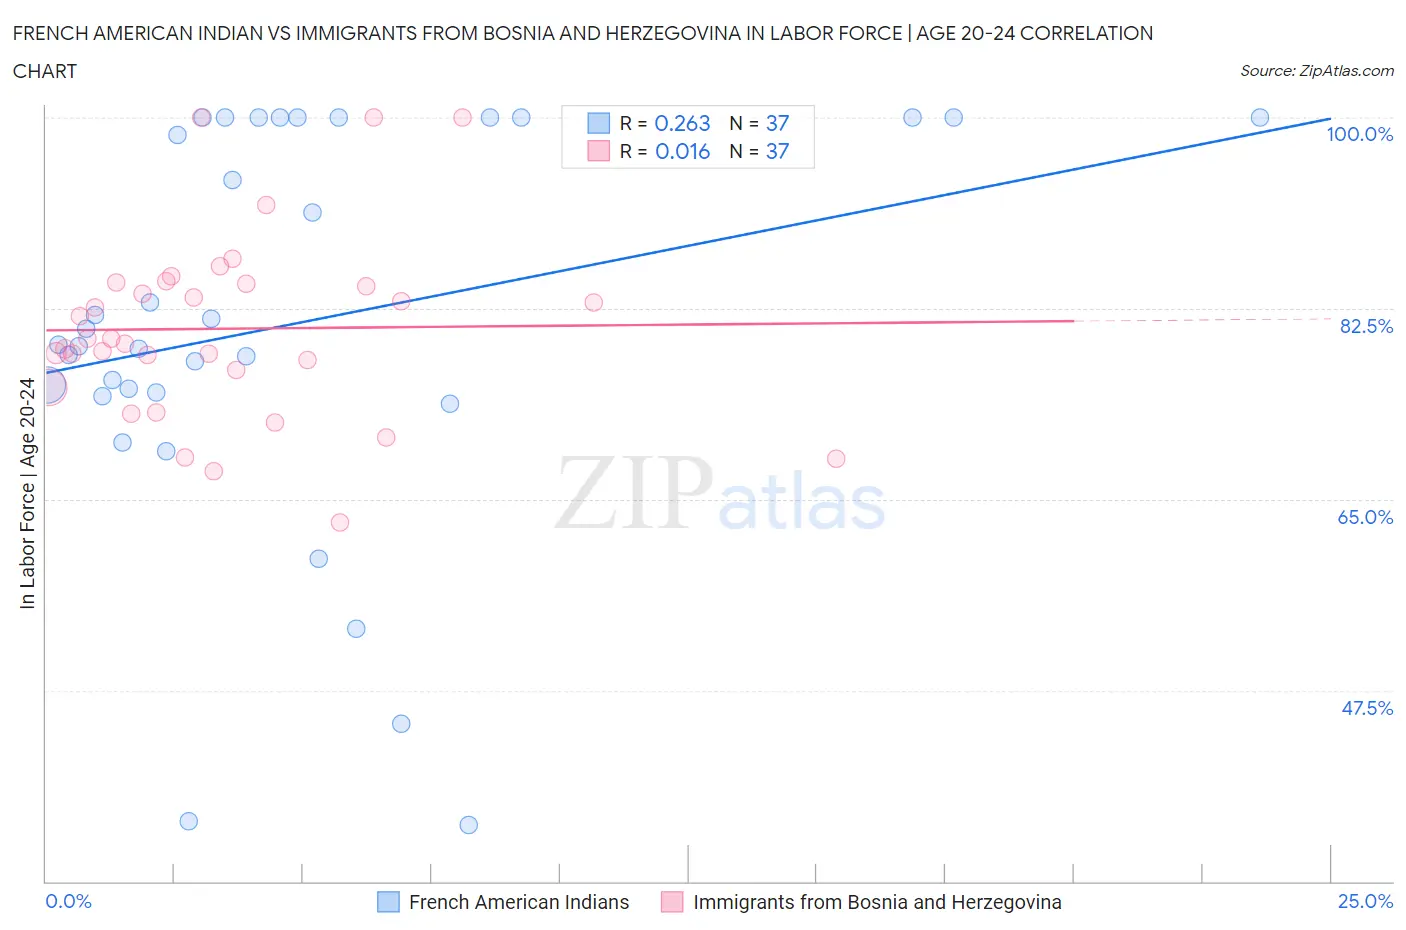 French American Indian vs Immigrants from Bosnia and Herzegovina In Labor Force | Age 20-24